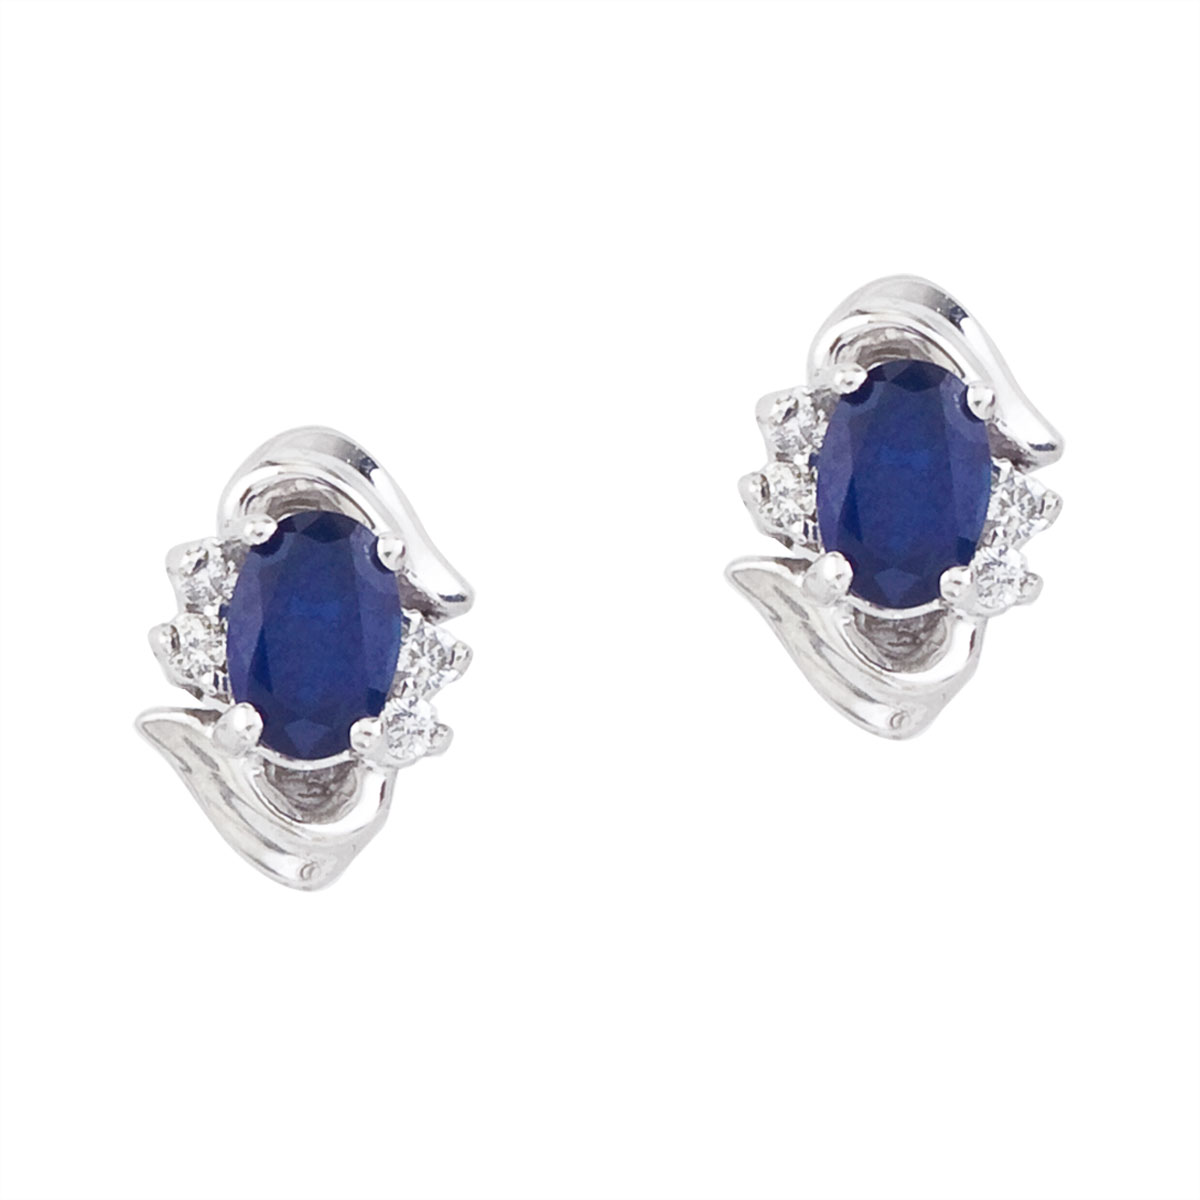 Stunning 14k white gold and sapphire earrings. Featuring natural 6x4 mm oval saphires and .11 tot...